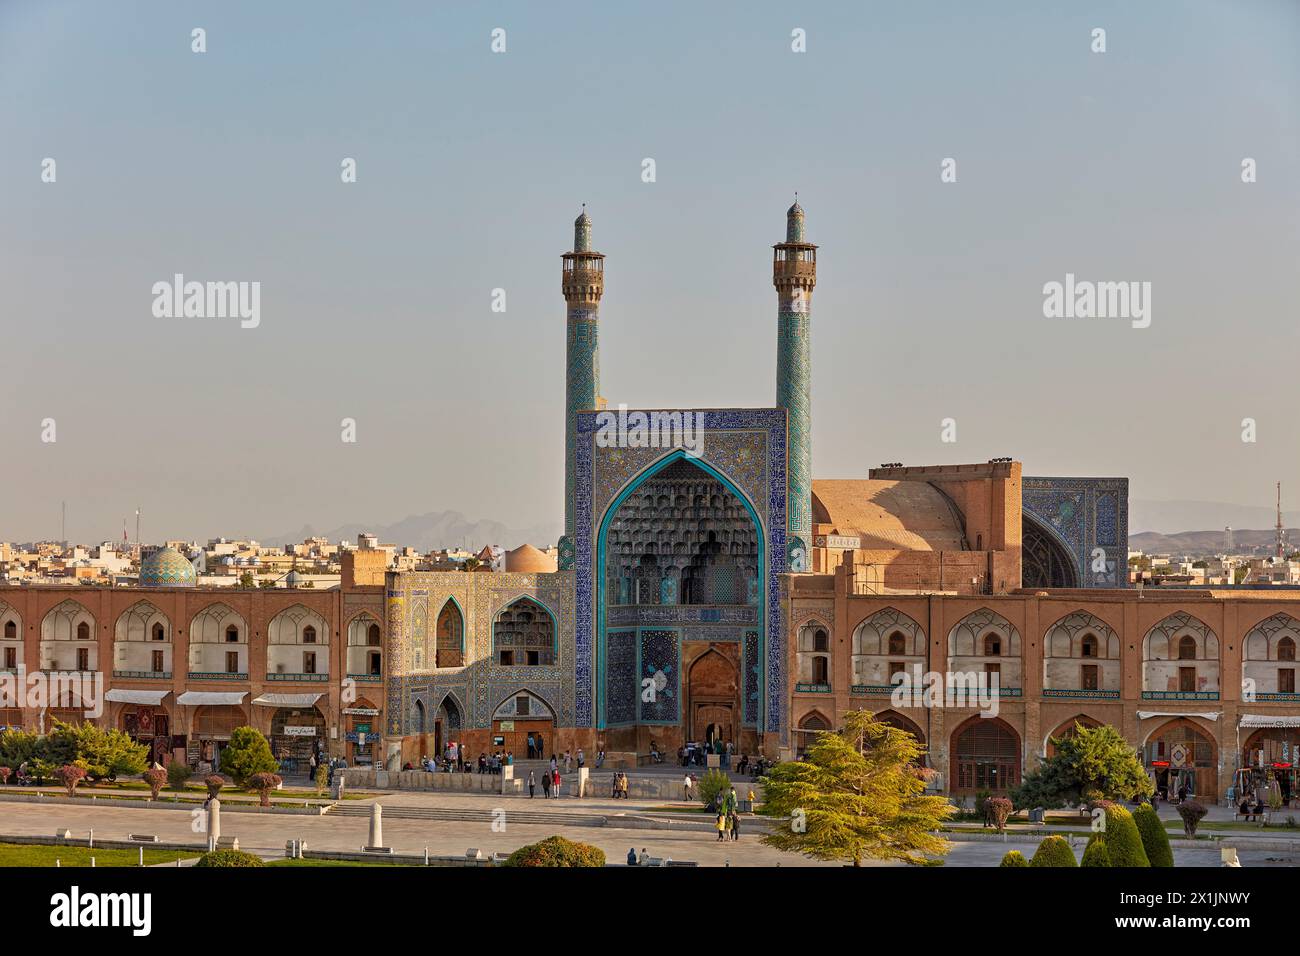 Elevated view of the minarets and the entrance iwan of the Shah Mosque (Masjed-e Shah) in Naqsh-e Jahan Square. Isfahan, Iran. Stock Photo